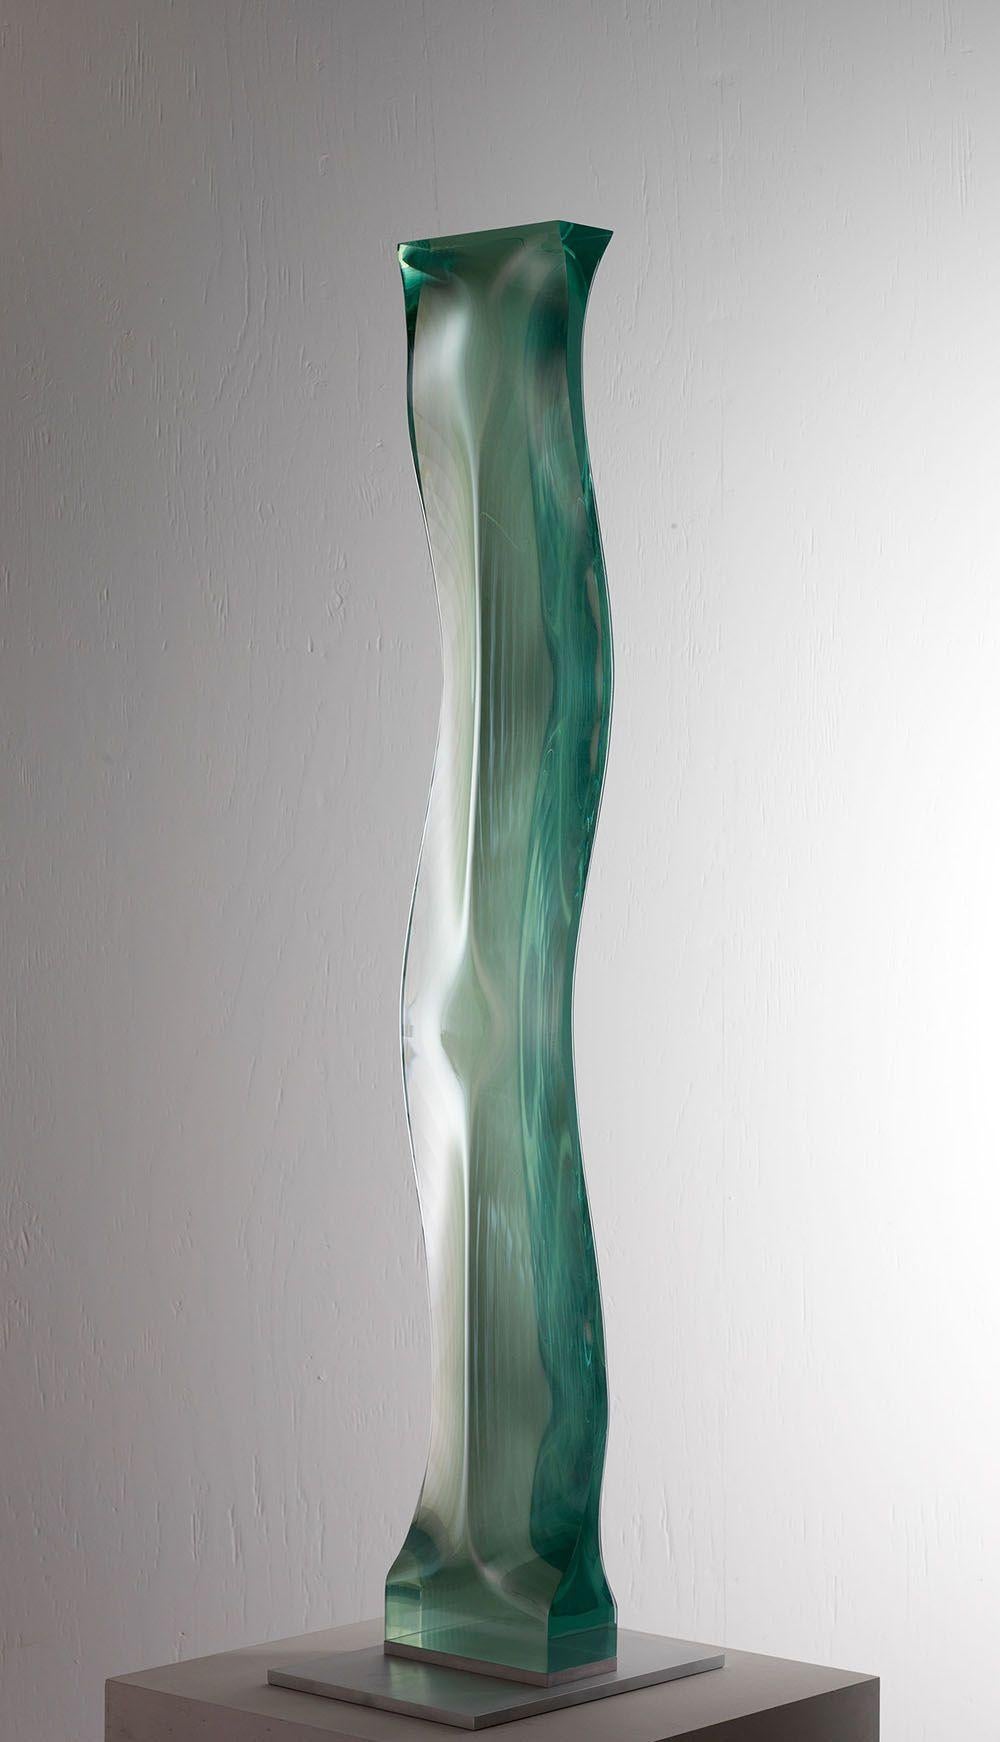 M.080601 by Toshio Iezumi - Contemporary glass sculpture, green, abstract, long For Sale 3